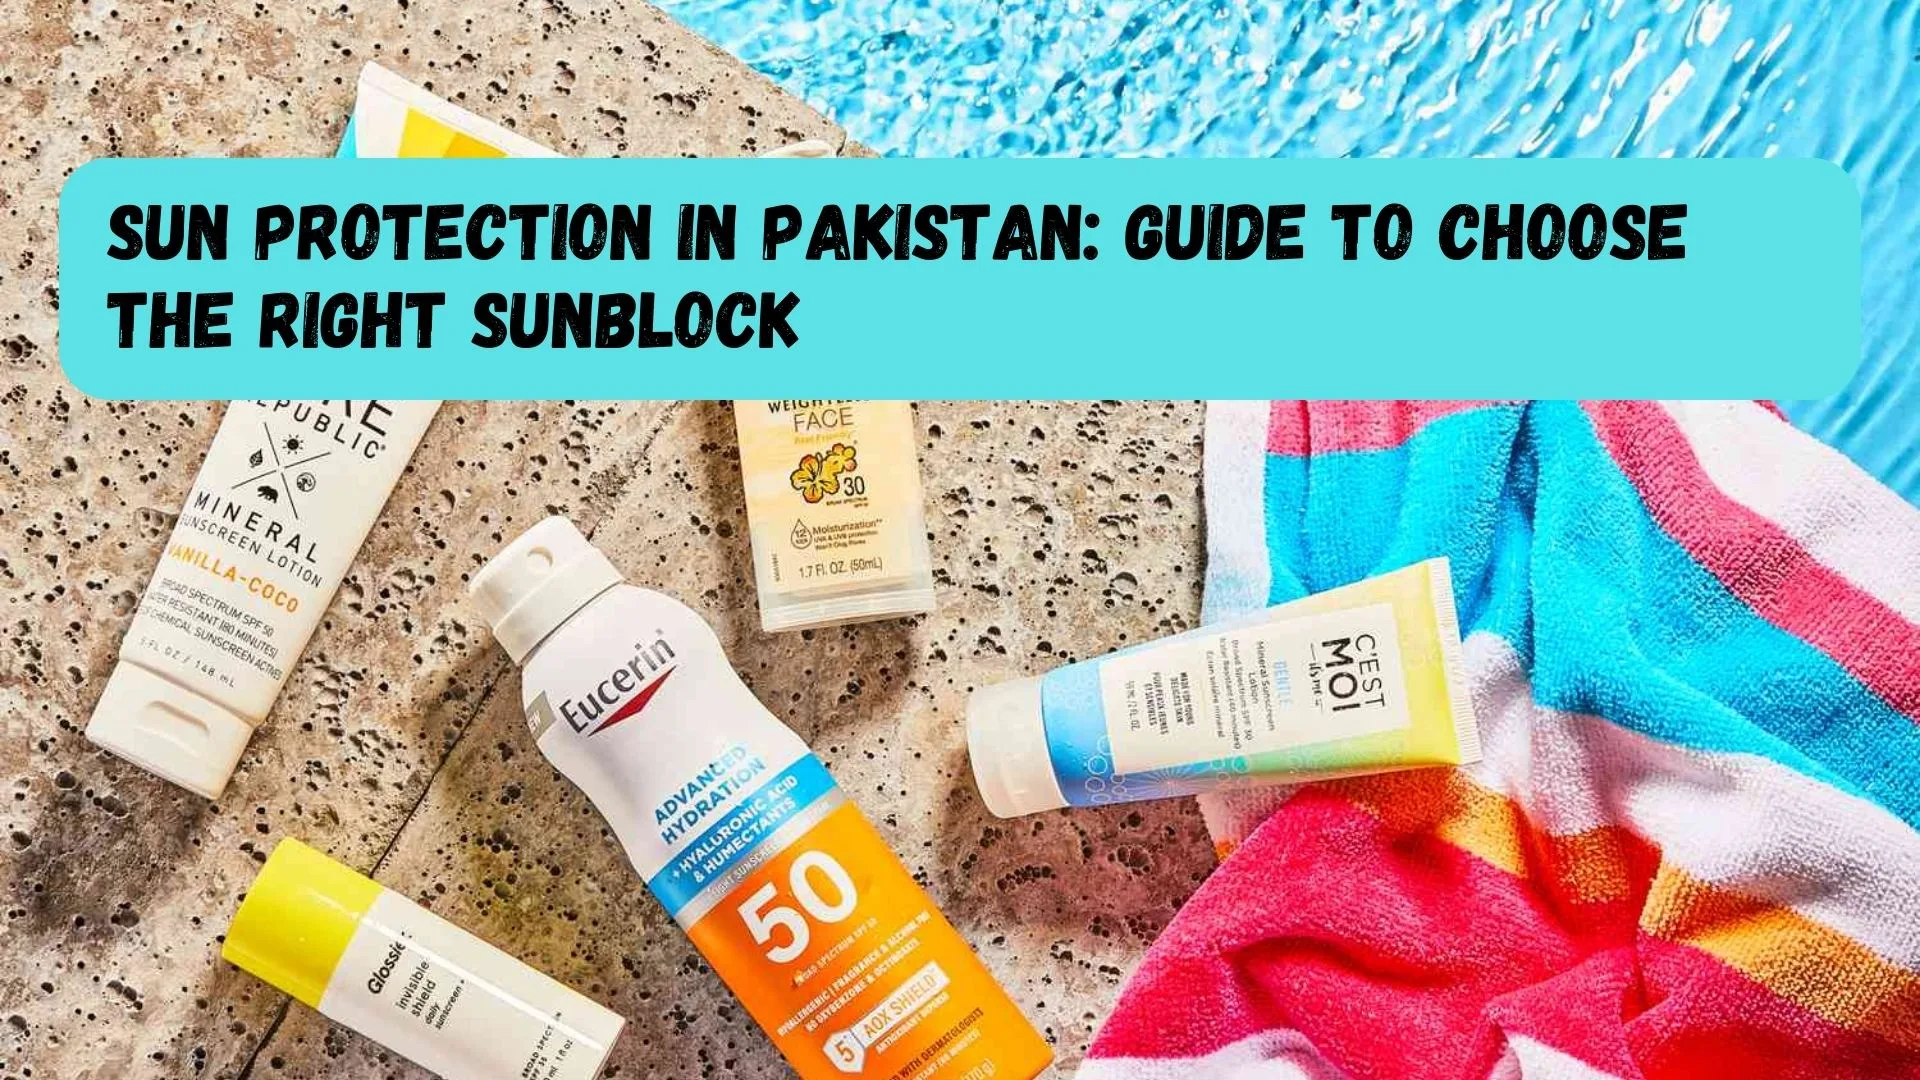 How to choose the right sunblock in Pakistan